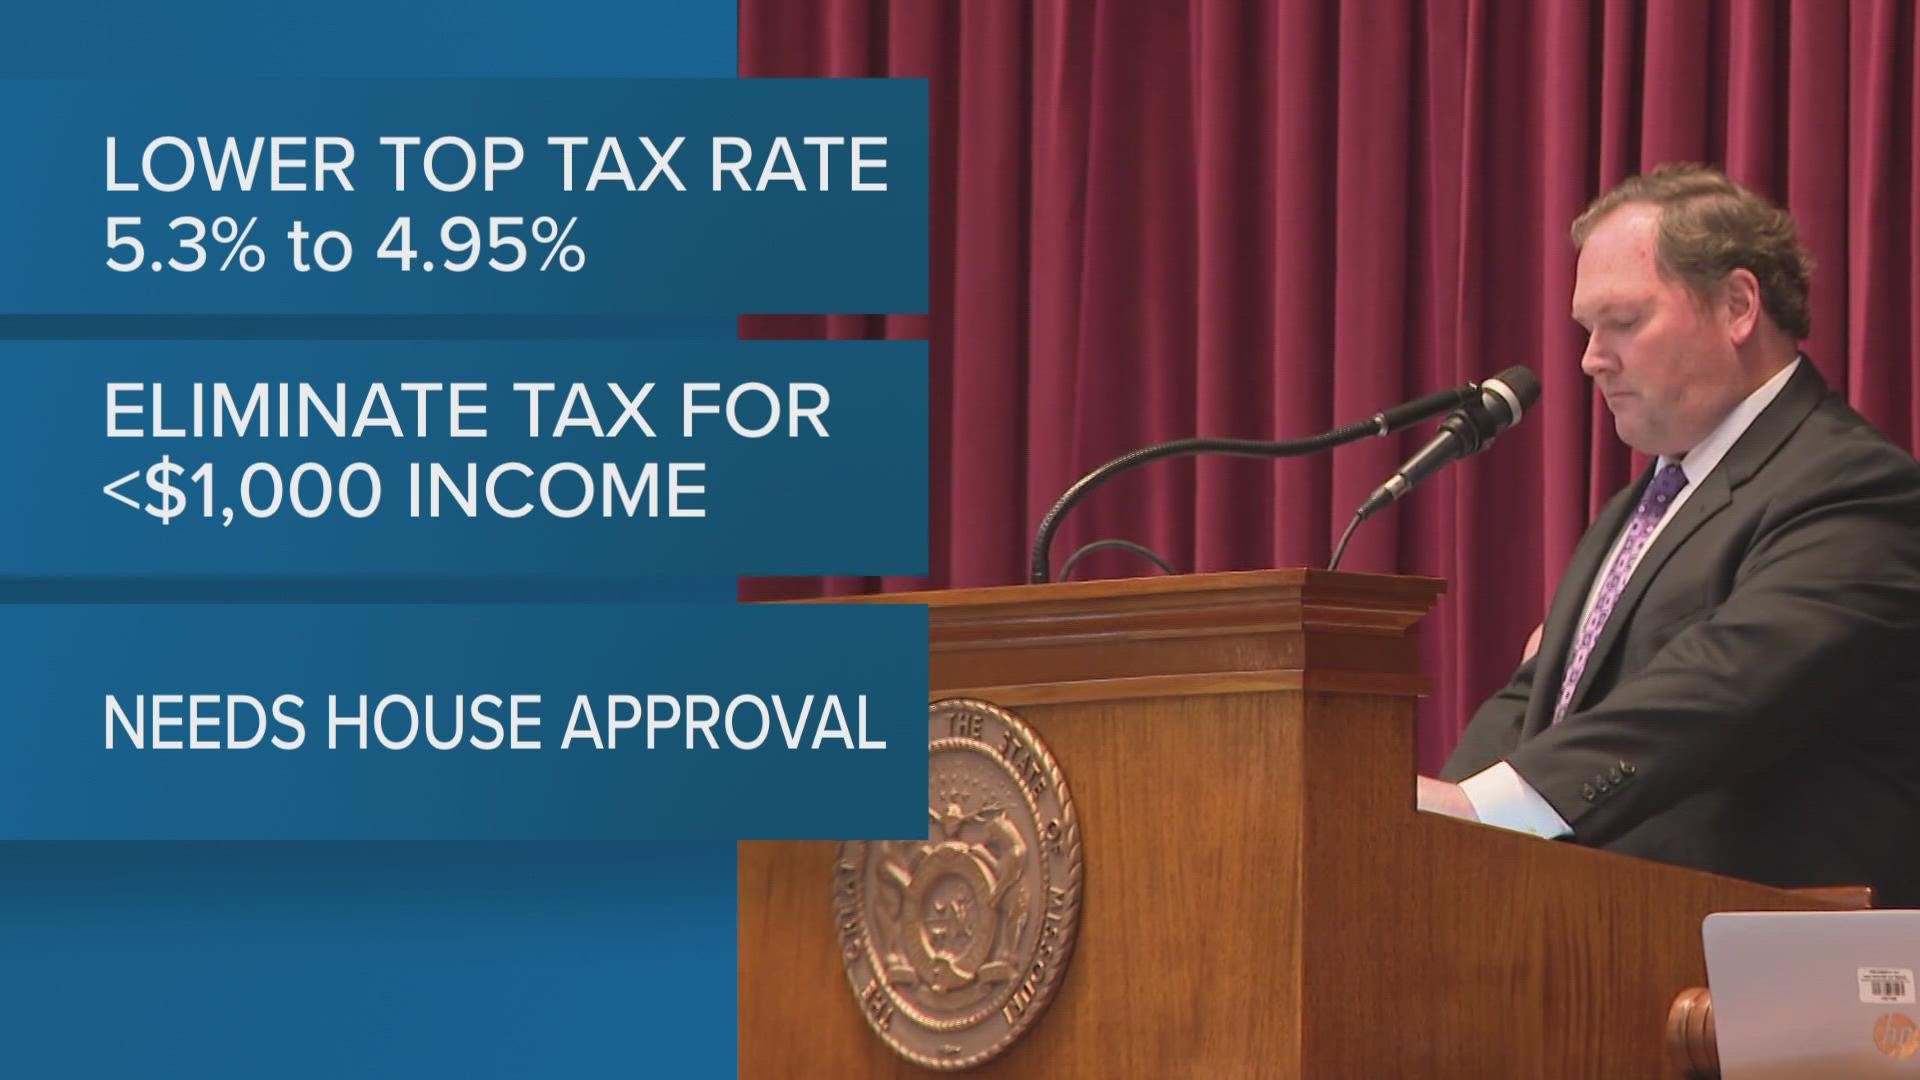 The roughly $1 billion proposal would cut the top income tax rate from 5.3% to 4.95% beginning in 2023.